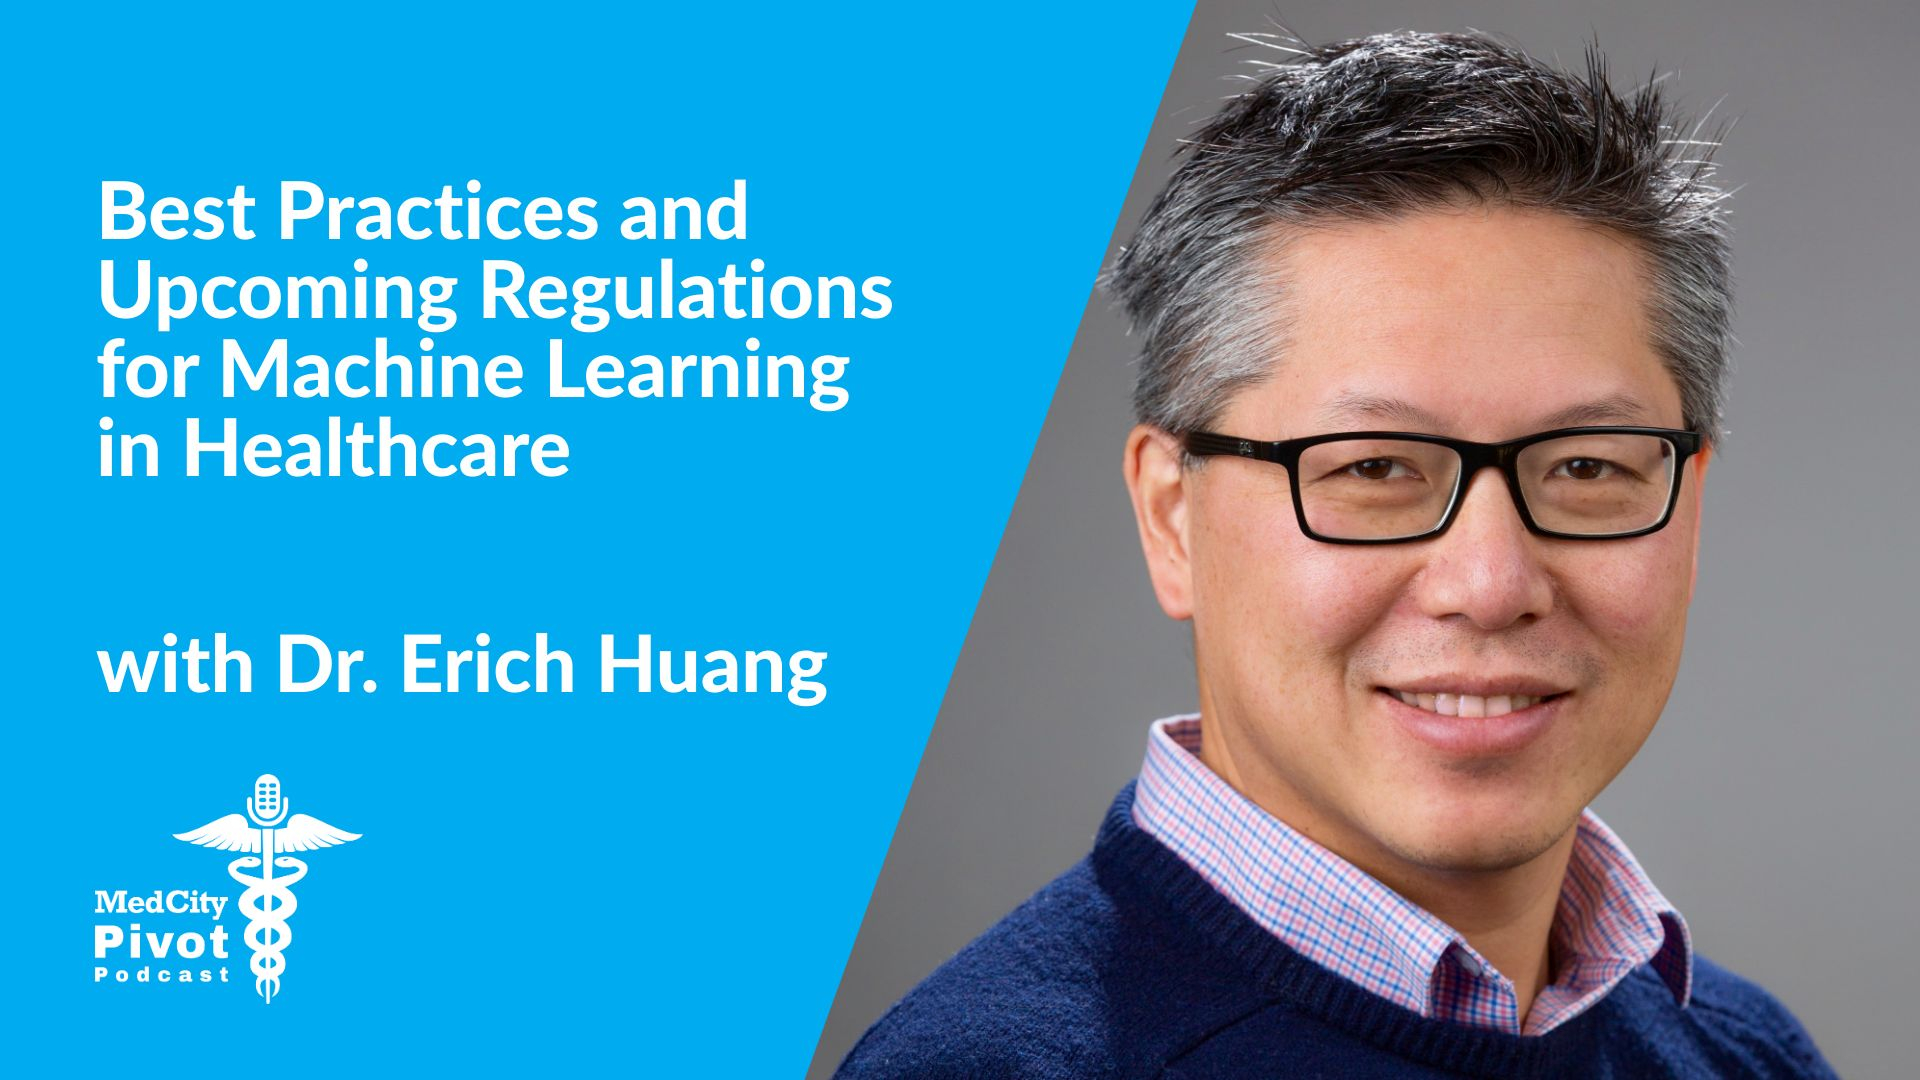 Best practices and upcoming regulations for machine learning in healthcare with Dr. Erich Huang